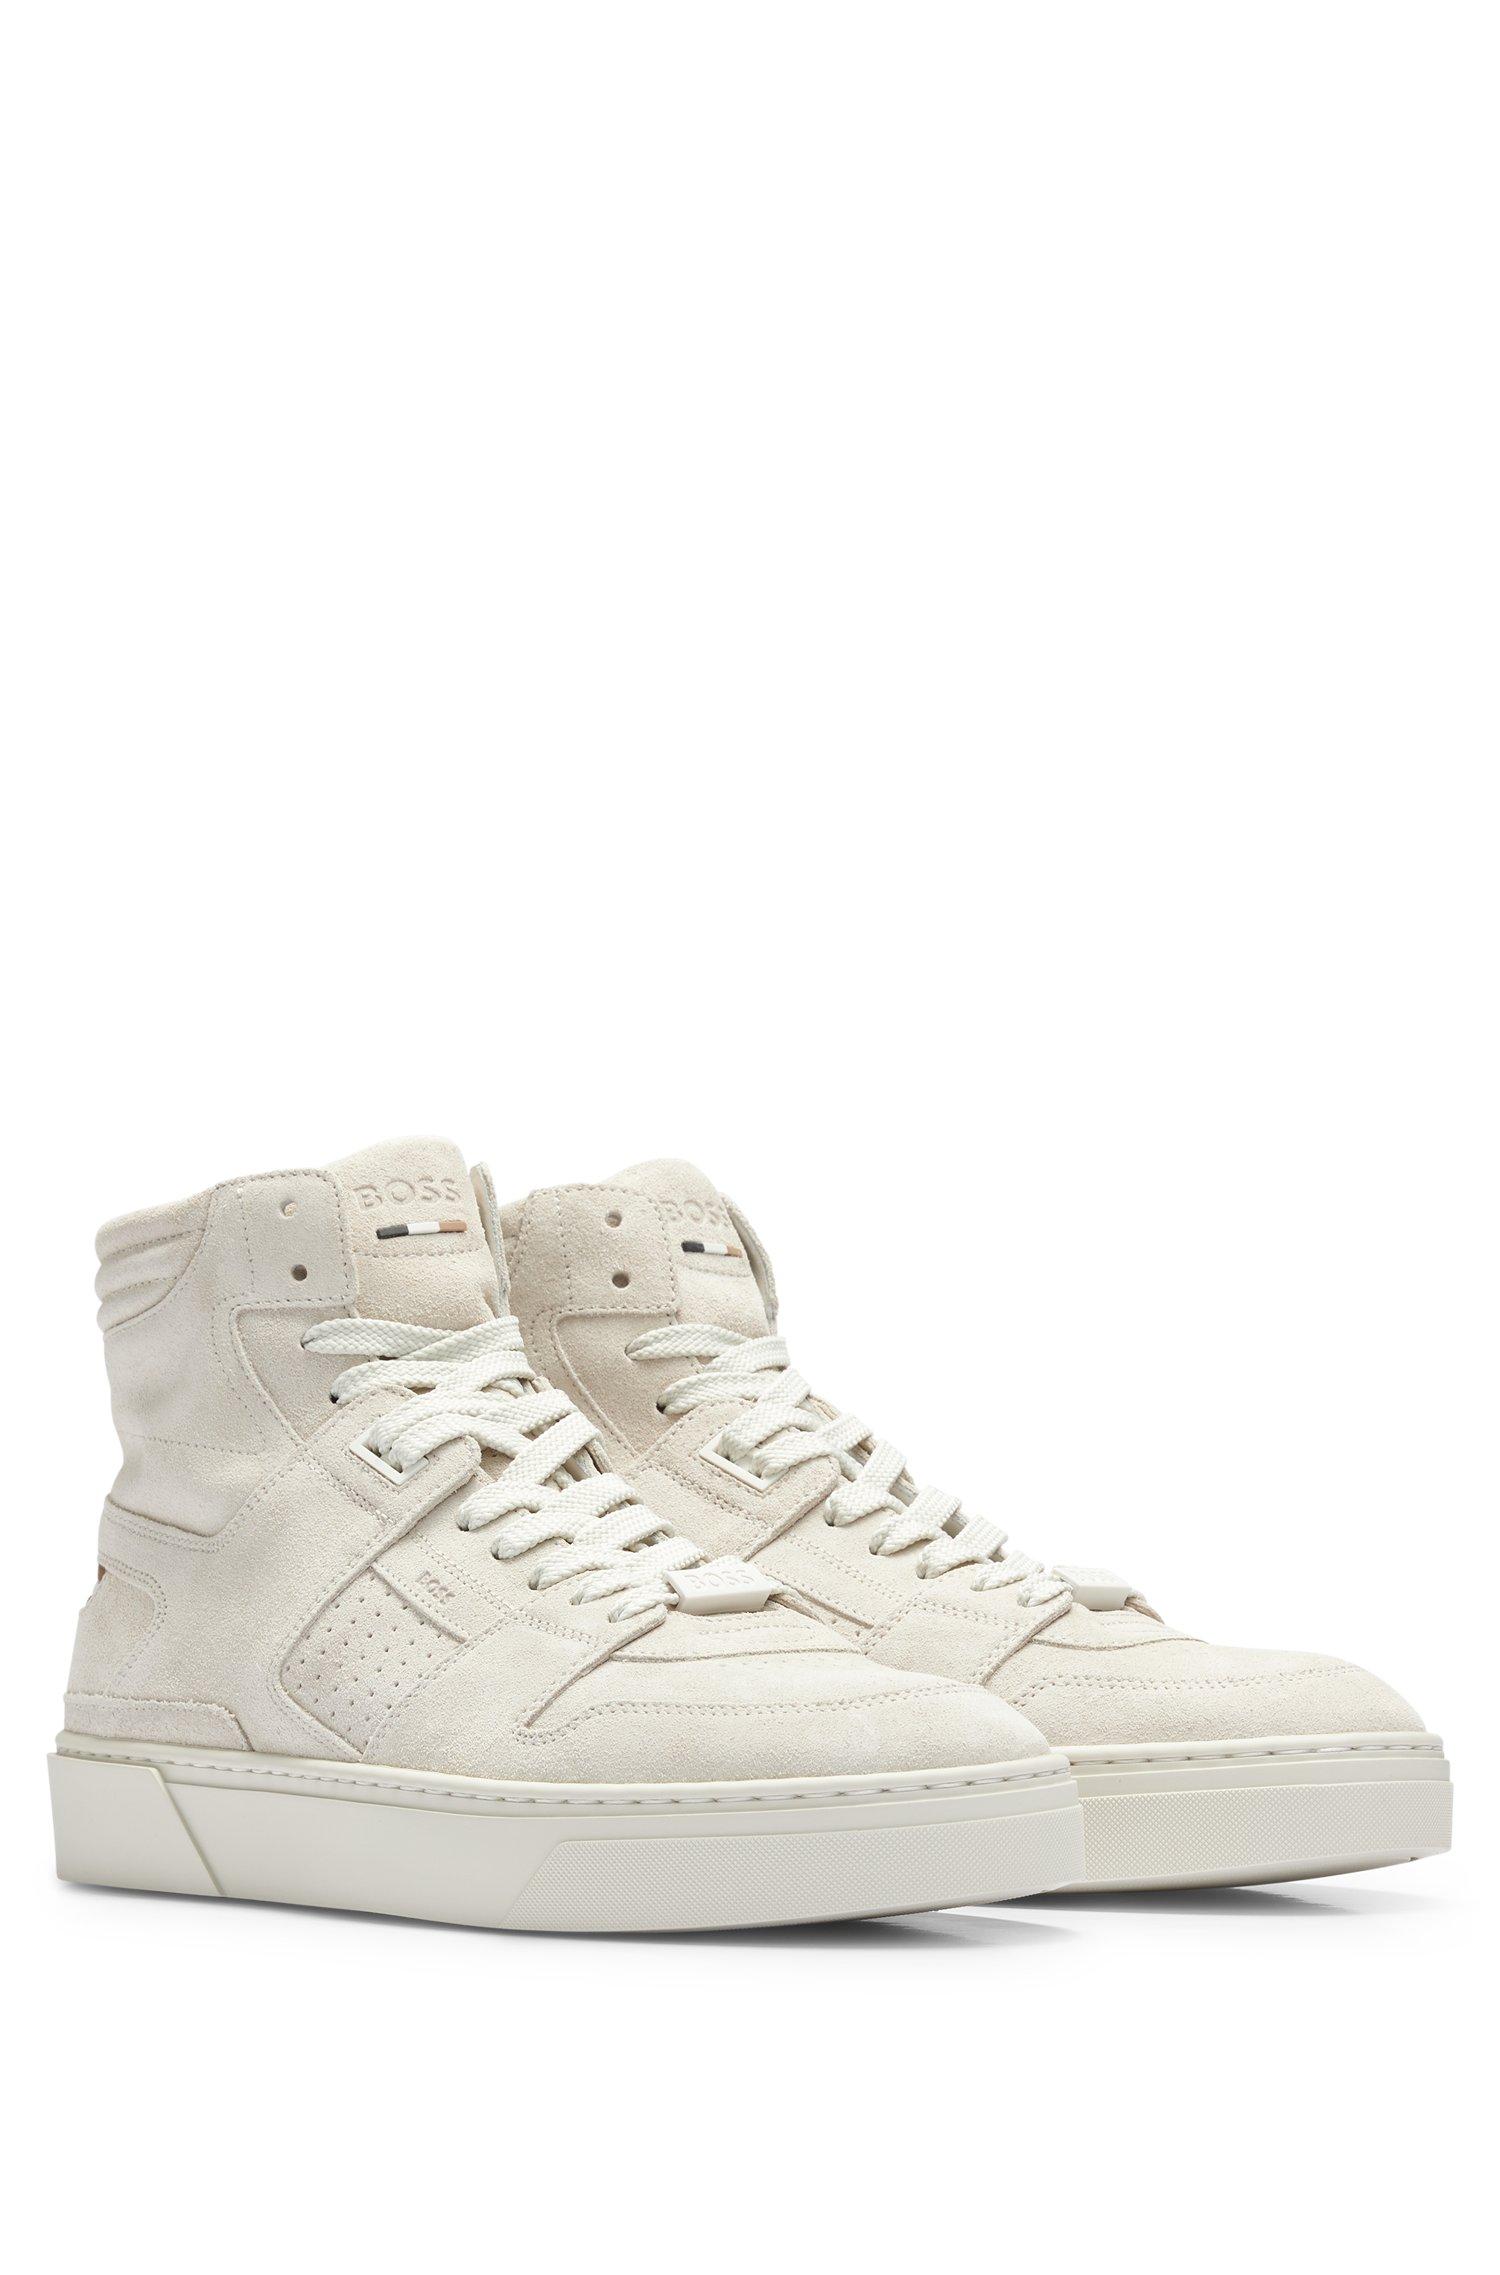 BOSS Leather High-top Trainers With Signature-stripe Detail in White ...